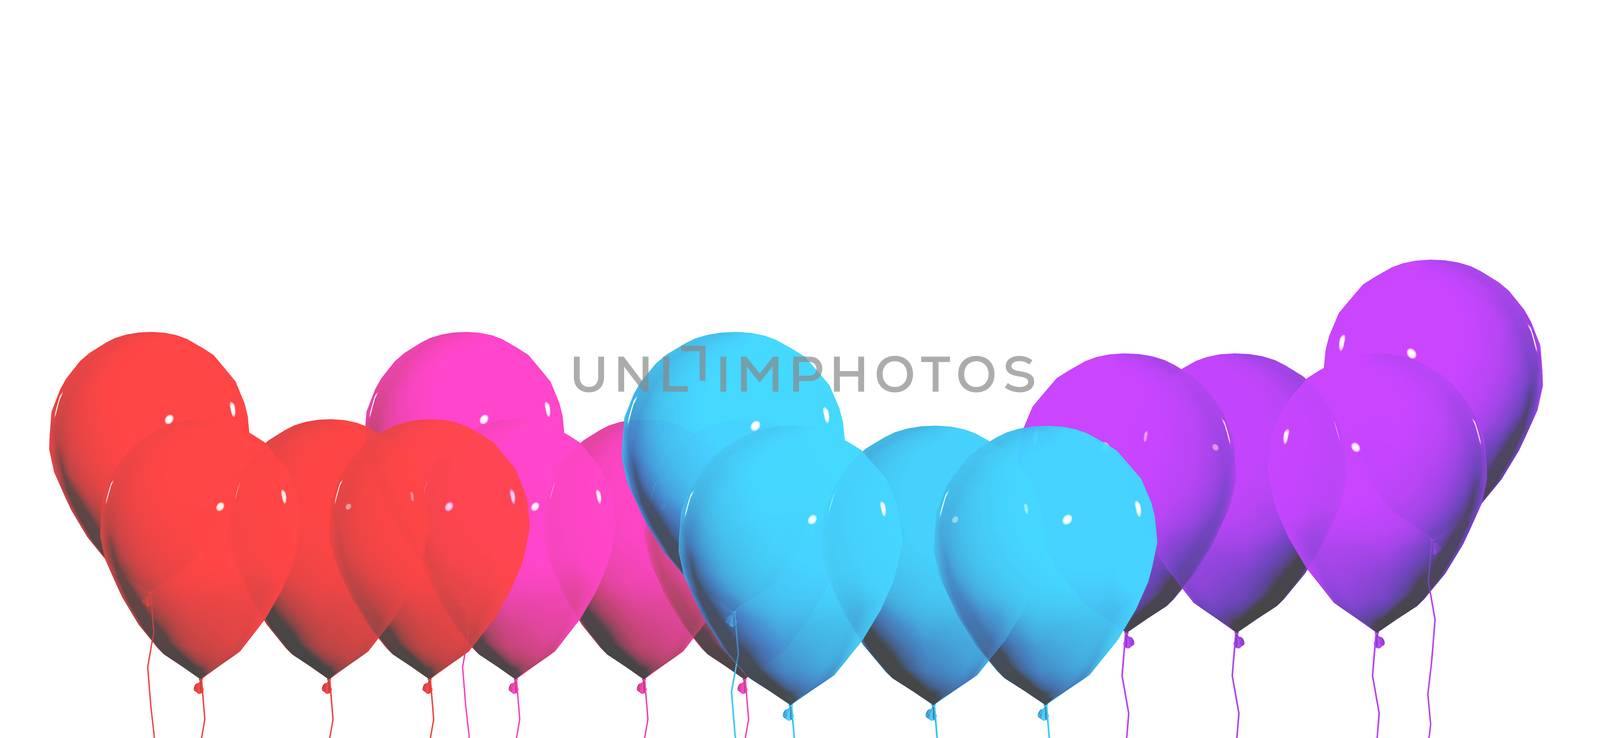 colored balloons by andreus24